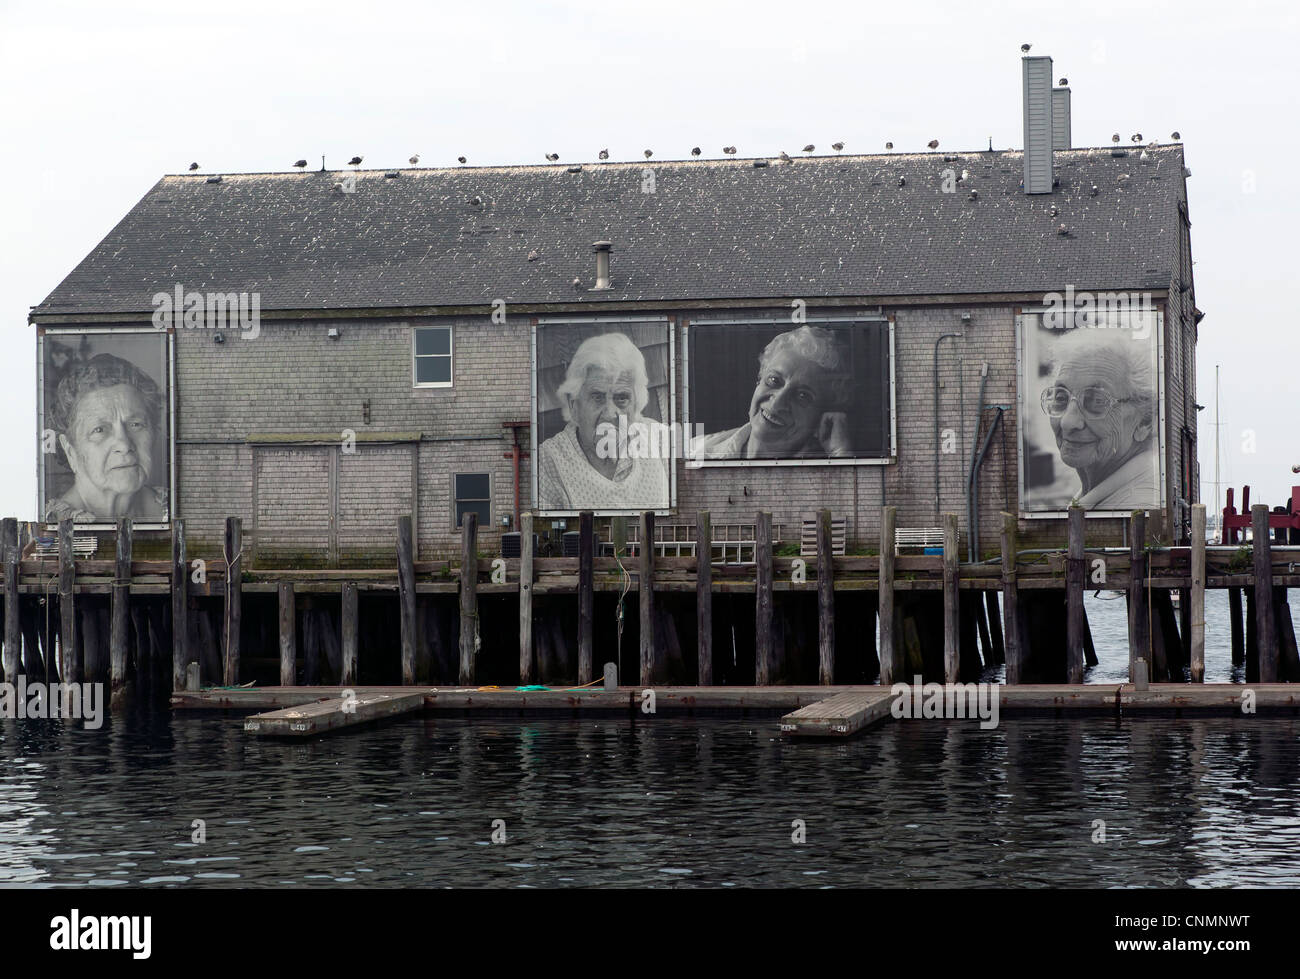 Black and White portrait photographs on a building at Fishermans Wharf, Provincetown, Cape Cod, Massachusetts, USA Stock Photo